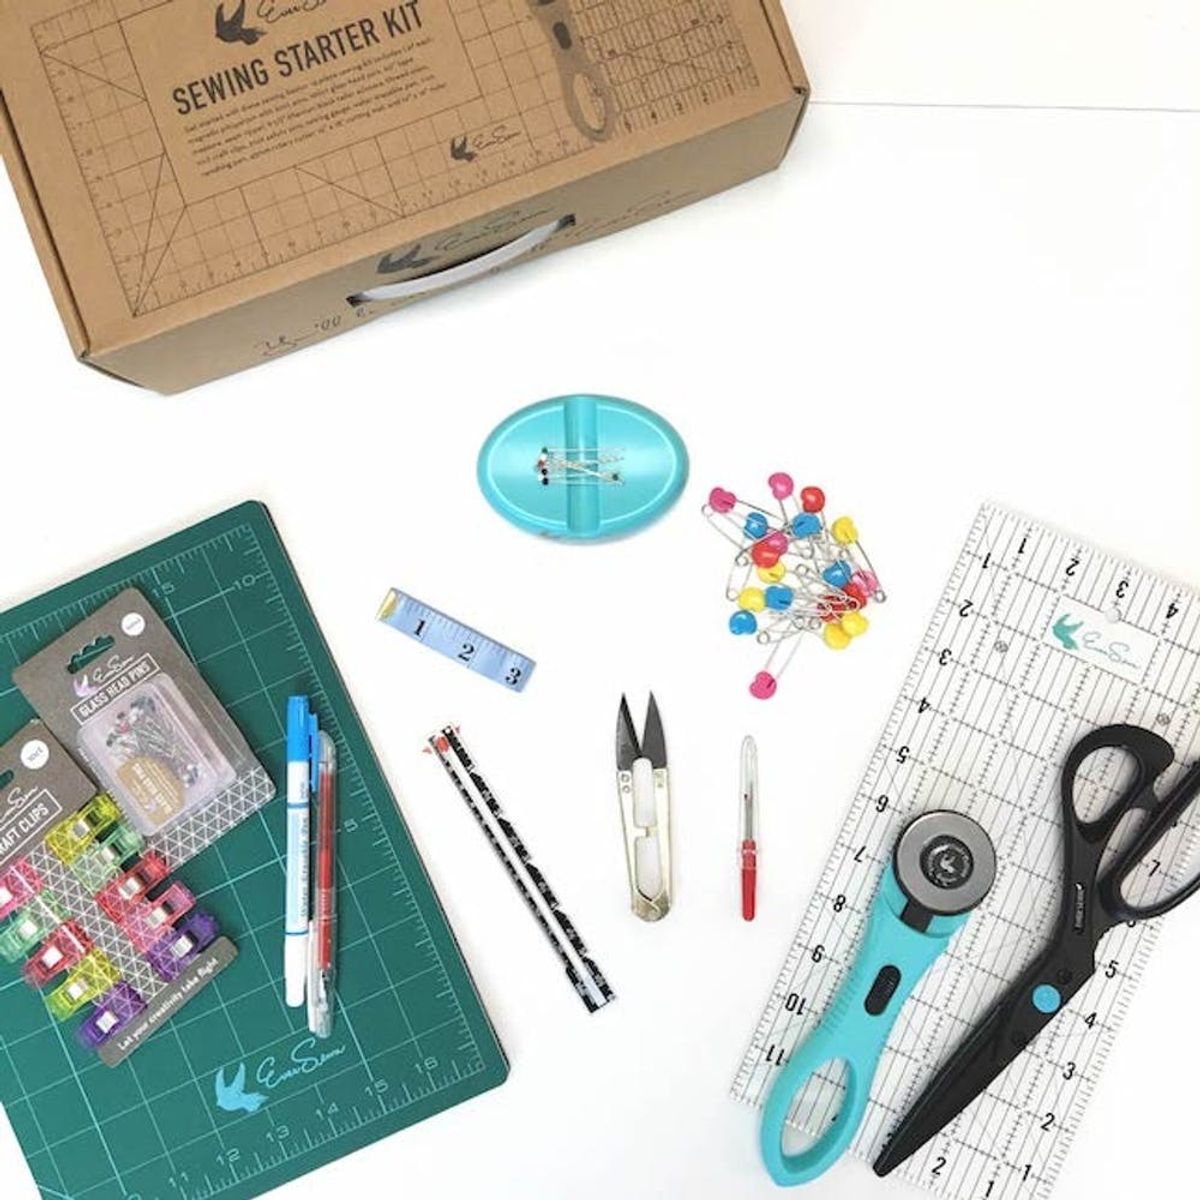 10 Products and Tools to Help You Explore Your Creative Side